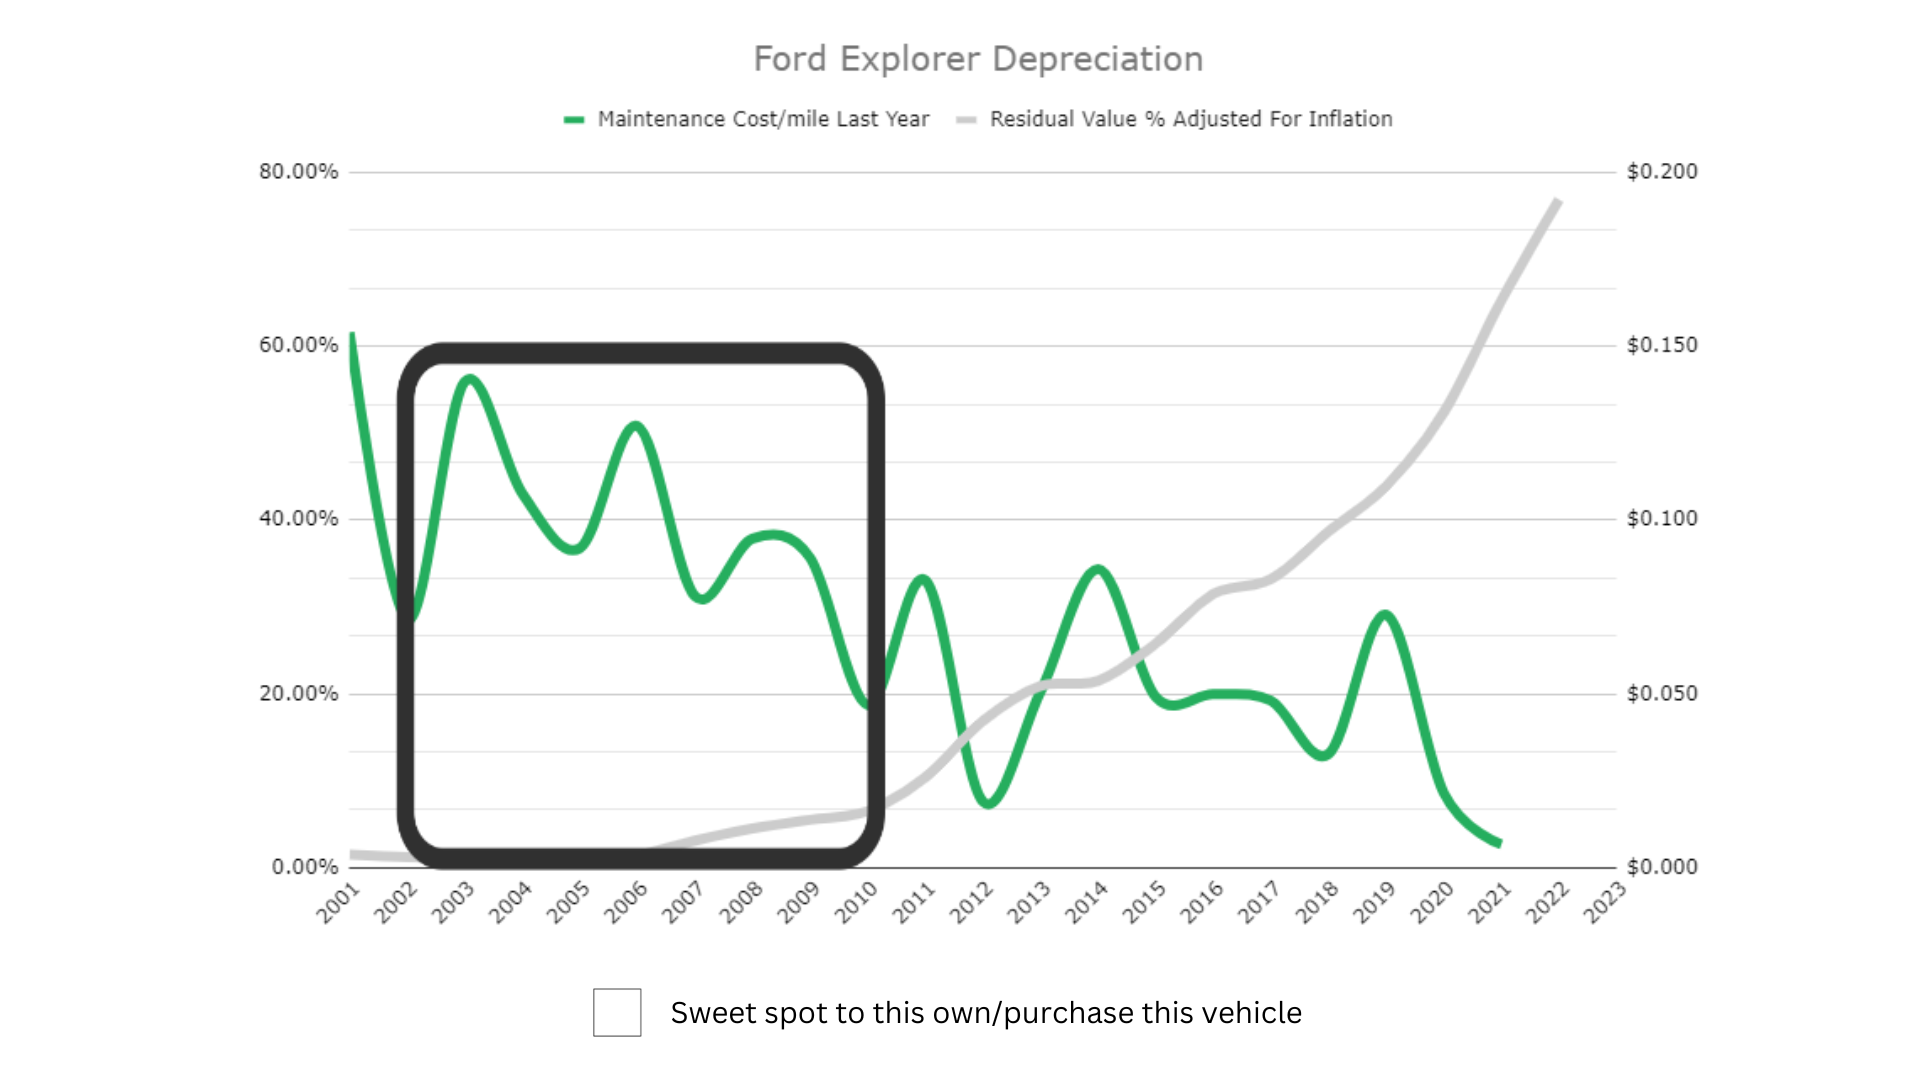 A chart showing the depreciation of the Ford Explorer. It shows the best time to own/purchase a Ford Explorer